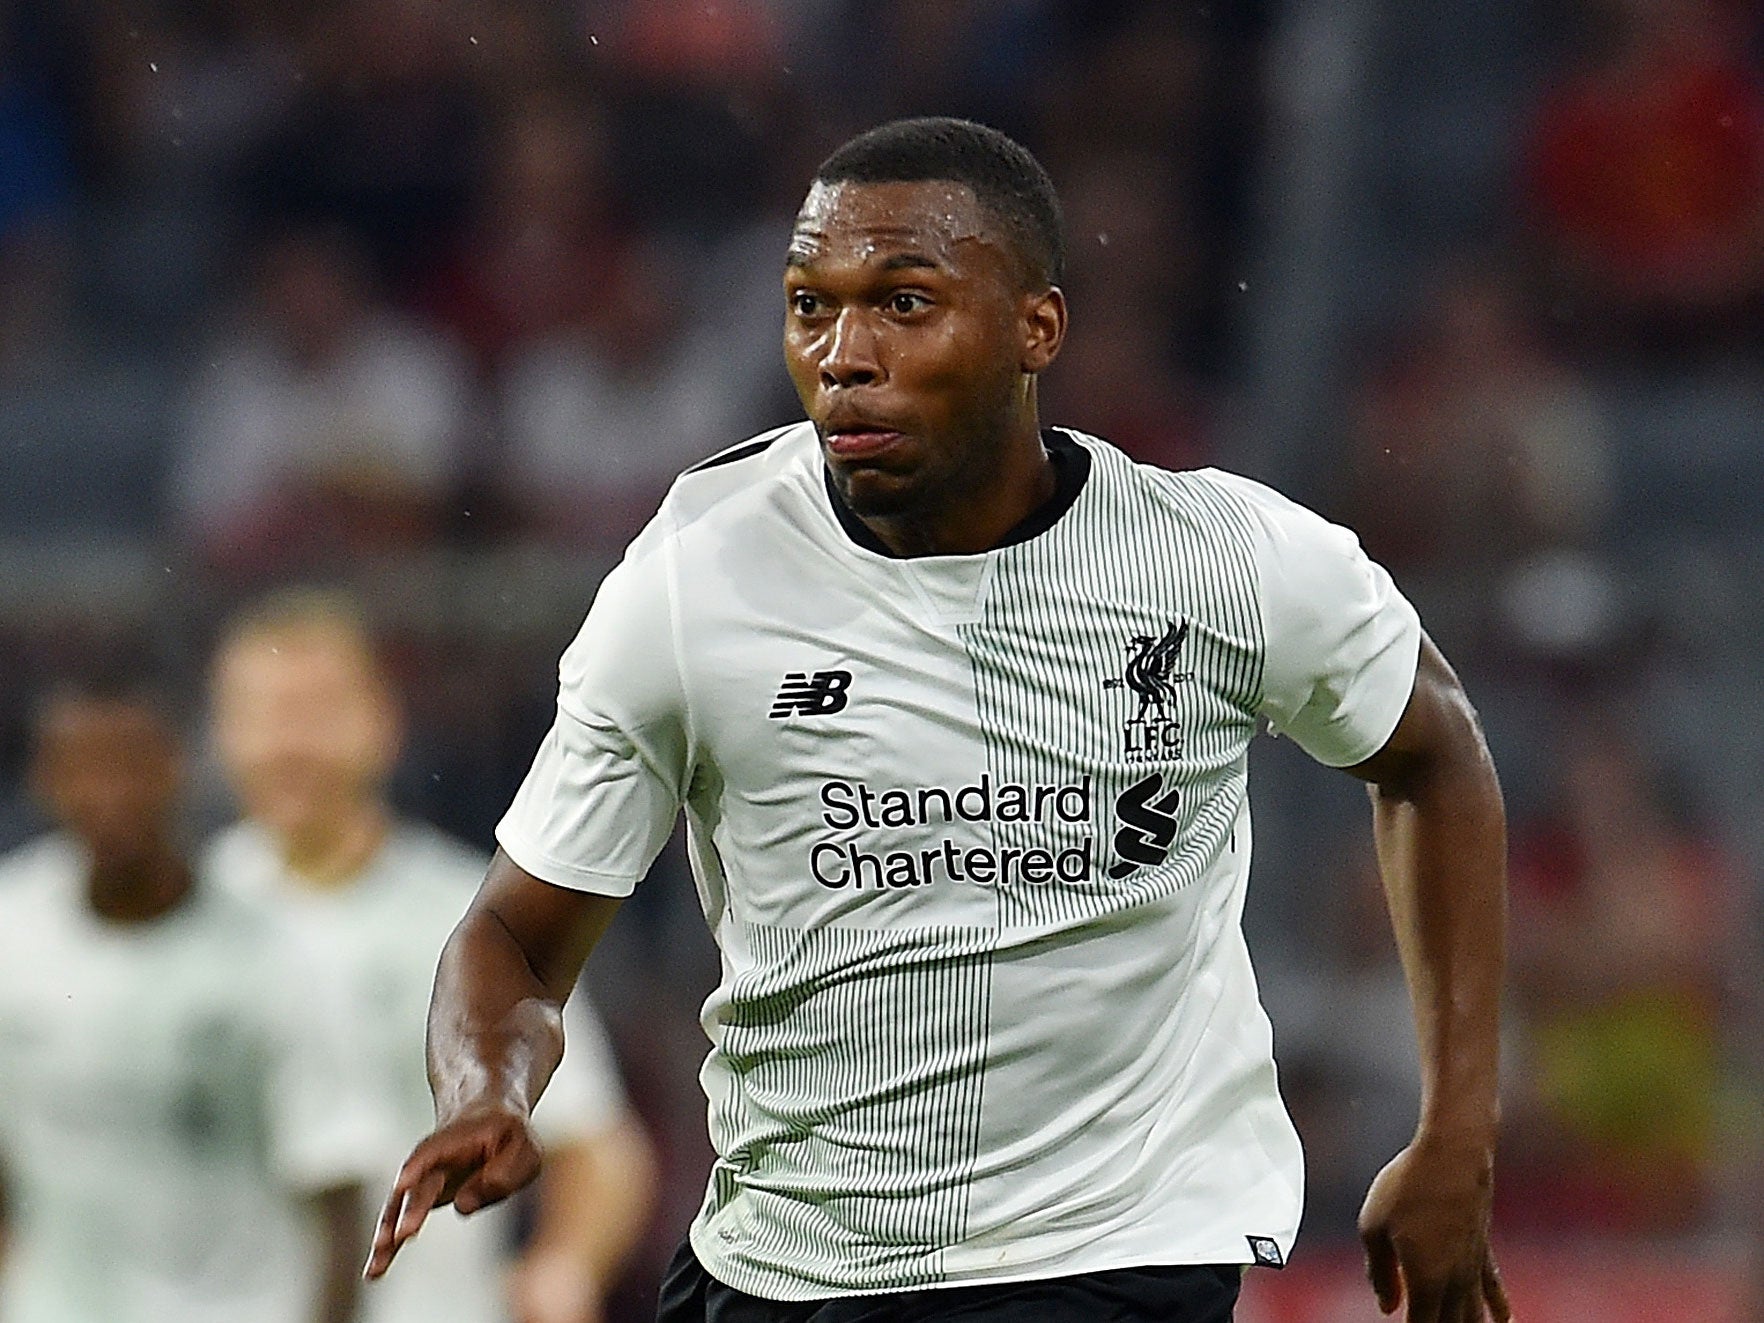 Daniel Sturridge was replaced shortly after scoring Liverpool's third goal